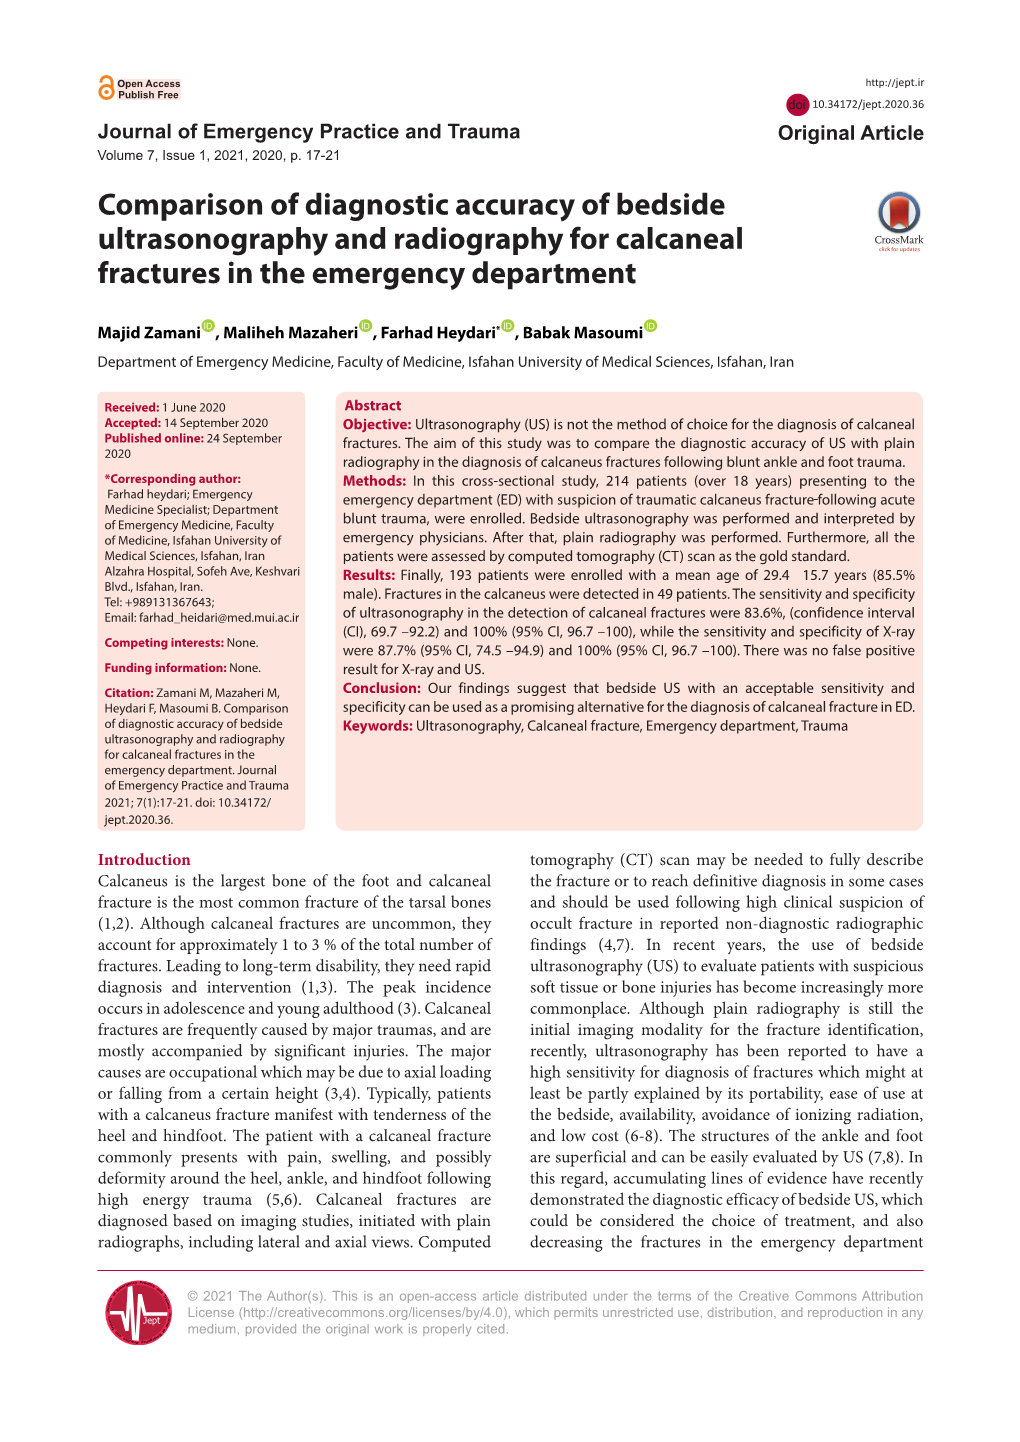 Comparison of Diagnostic Accuracy of Bedside Ultrasonography and Radiography for Calcaneal Fractures in the Emergency Department